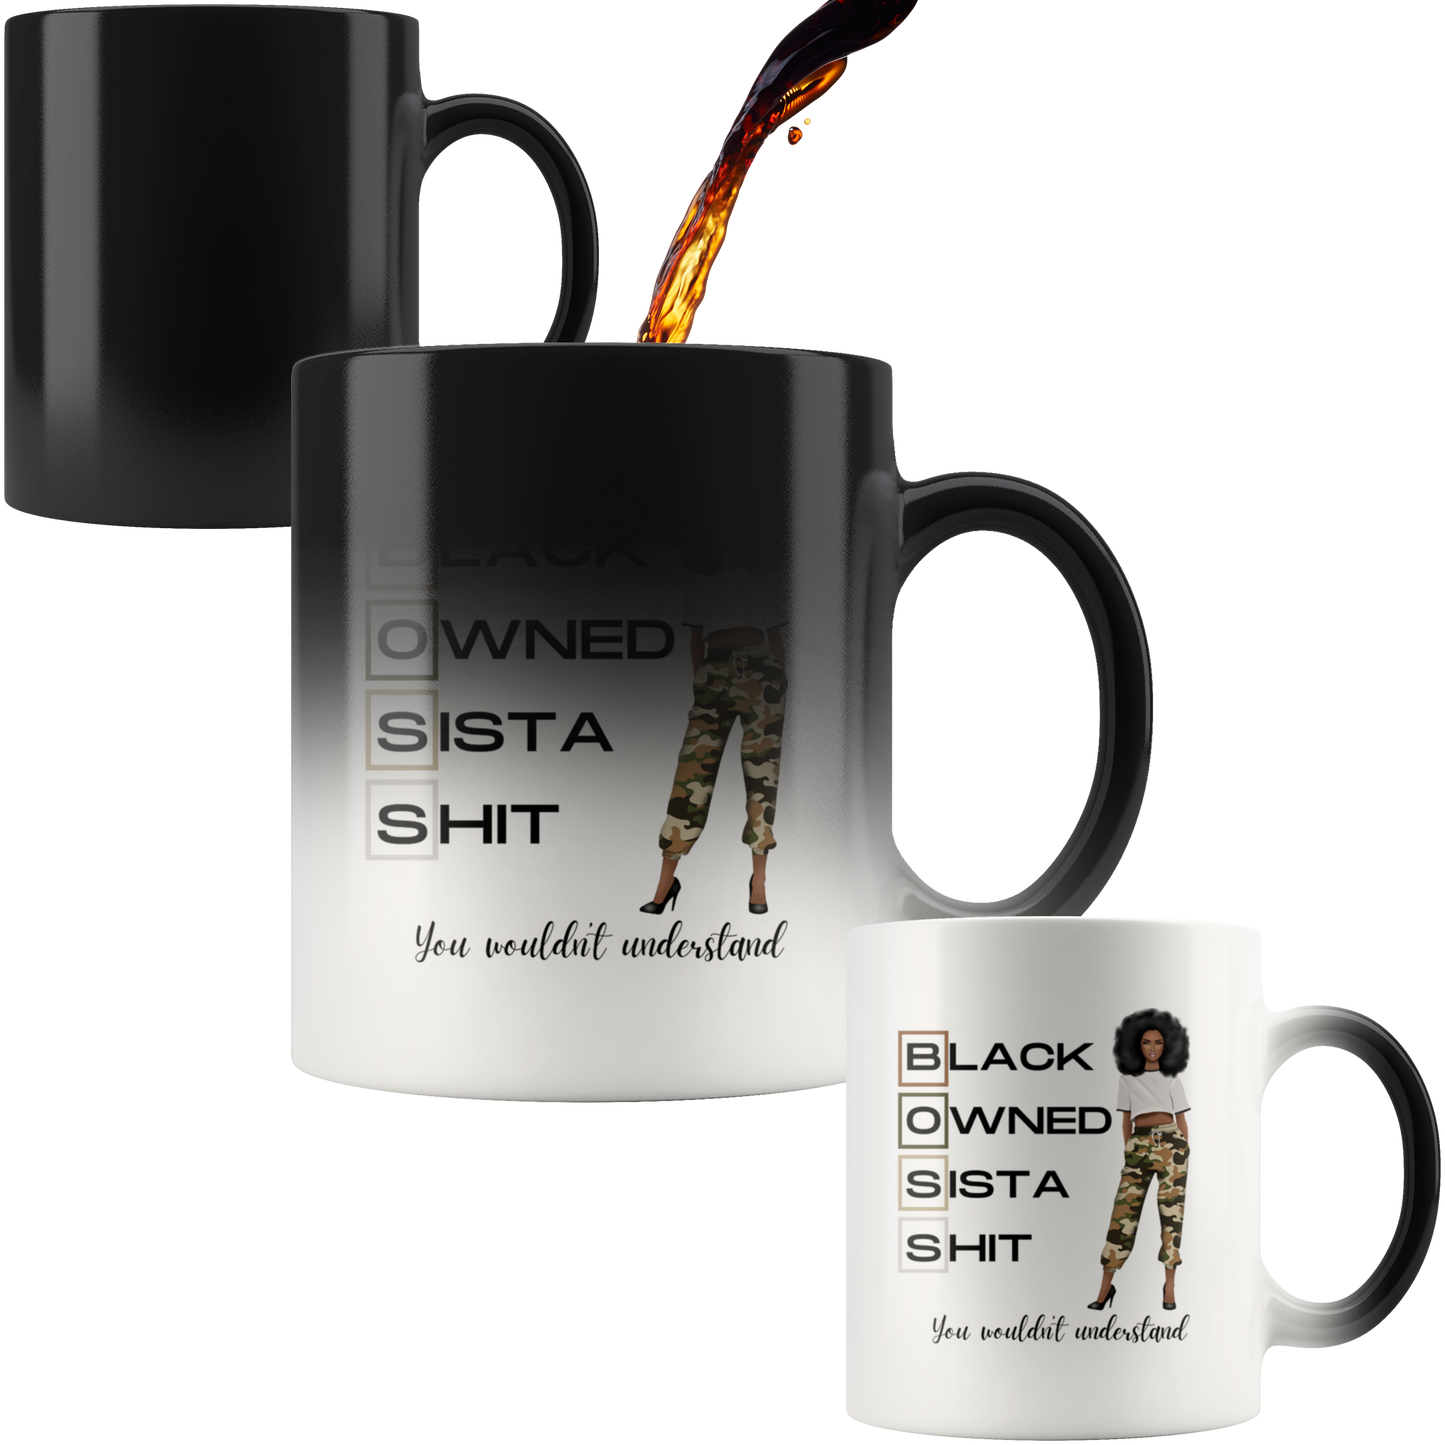 Black Owned Sista Shit, You Wouldn’t Understand Magic Mug